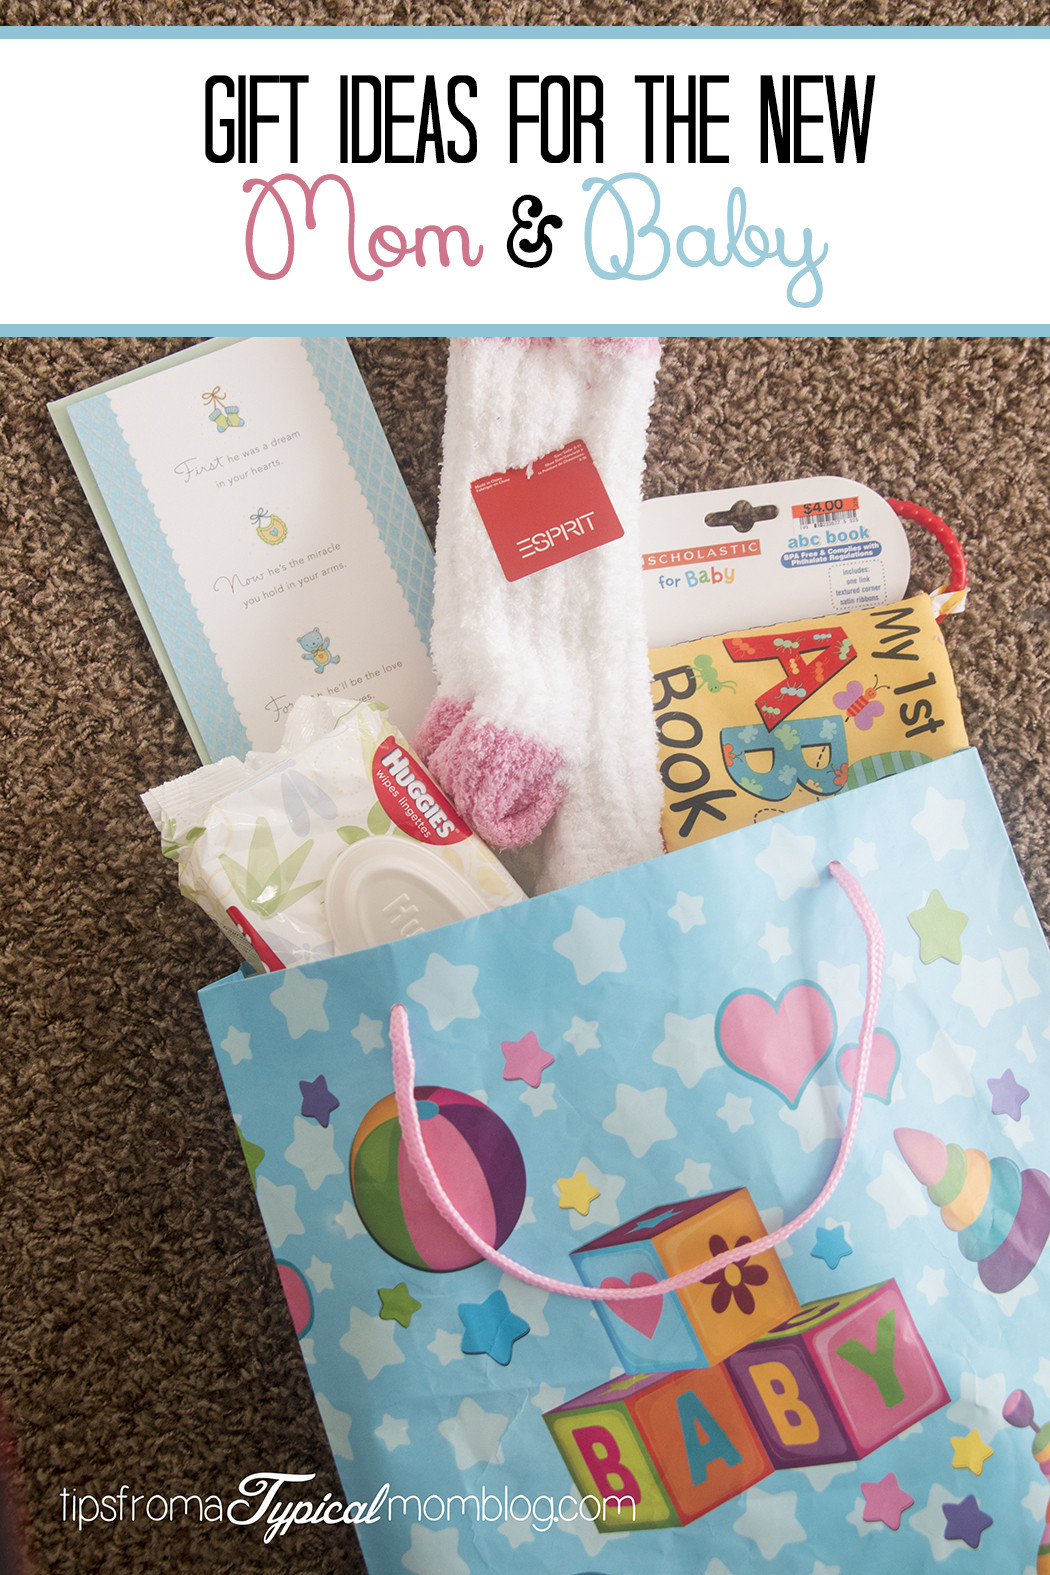 Www Ideas For A Gift For Family For New Baby
 Gift Ideas for the New Mom and Baby Tips from a Typical Mom